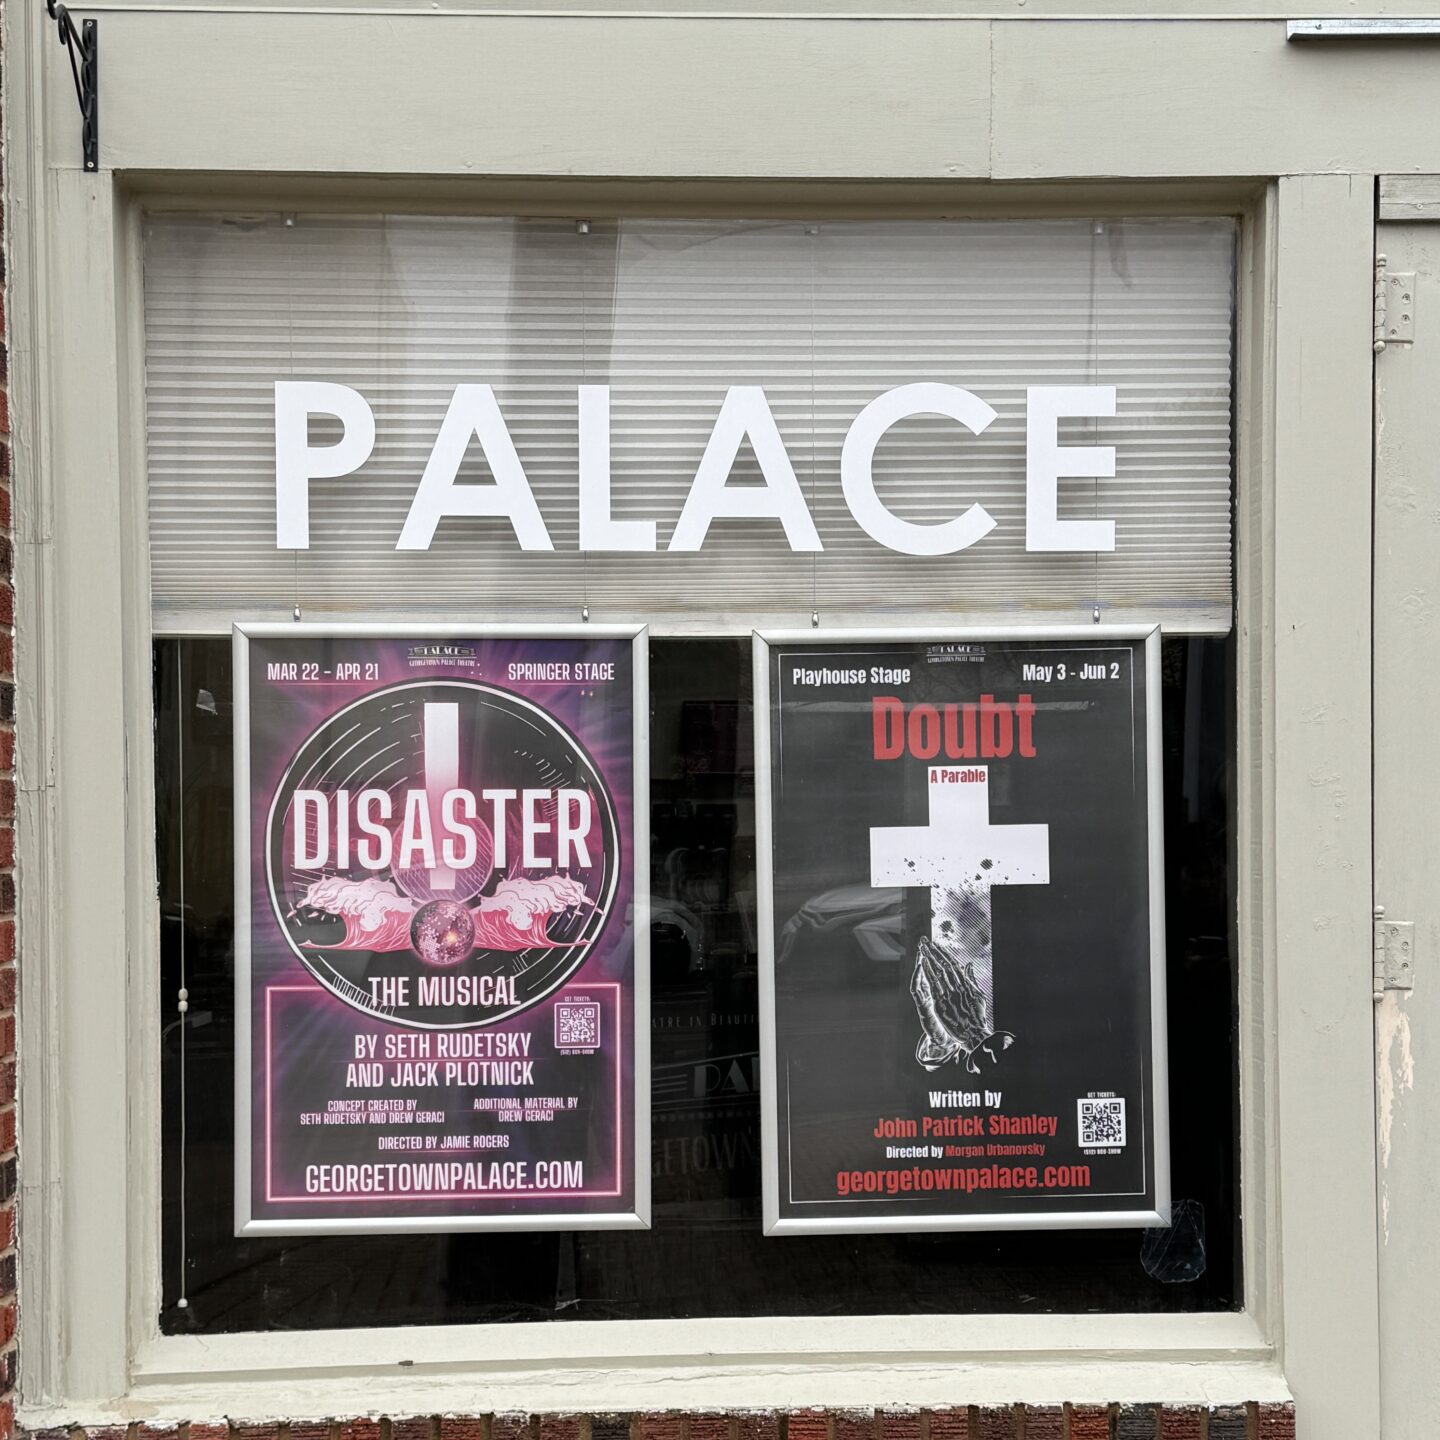 Palace theater signs showing Disaster and Doubt playing in Georgetown, TX to discuss the Photoshop image of Kate Middleton.